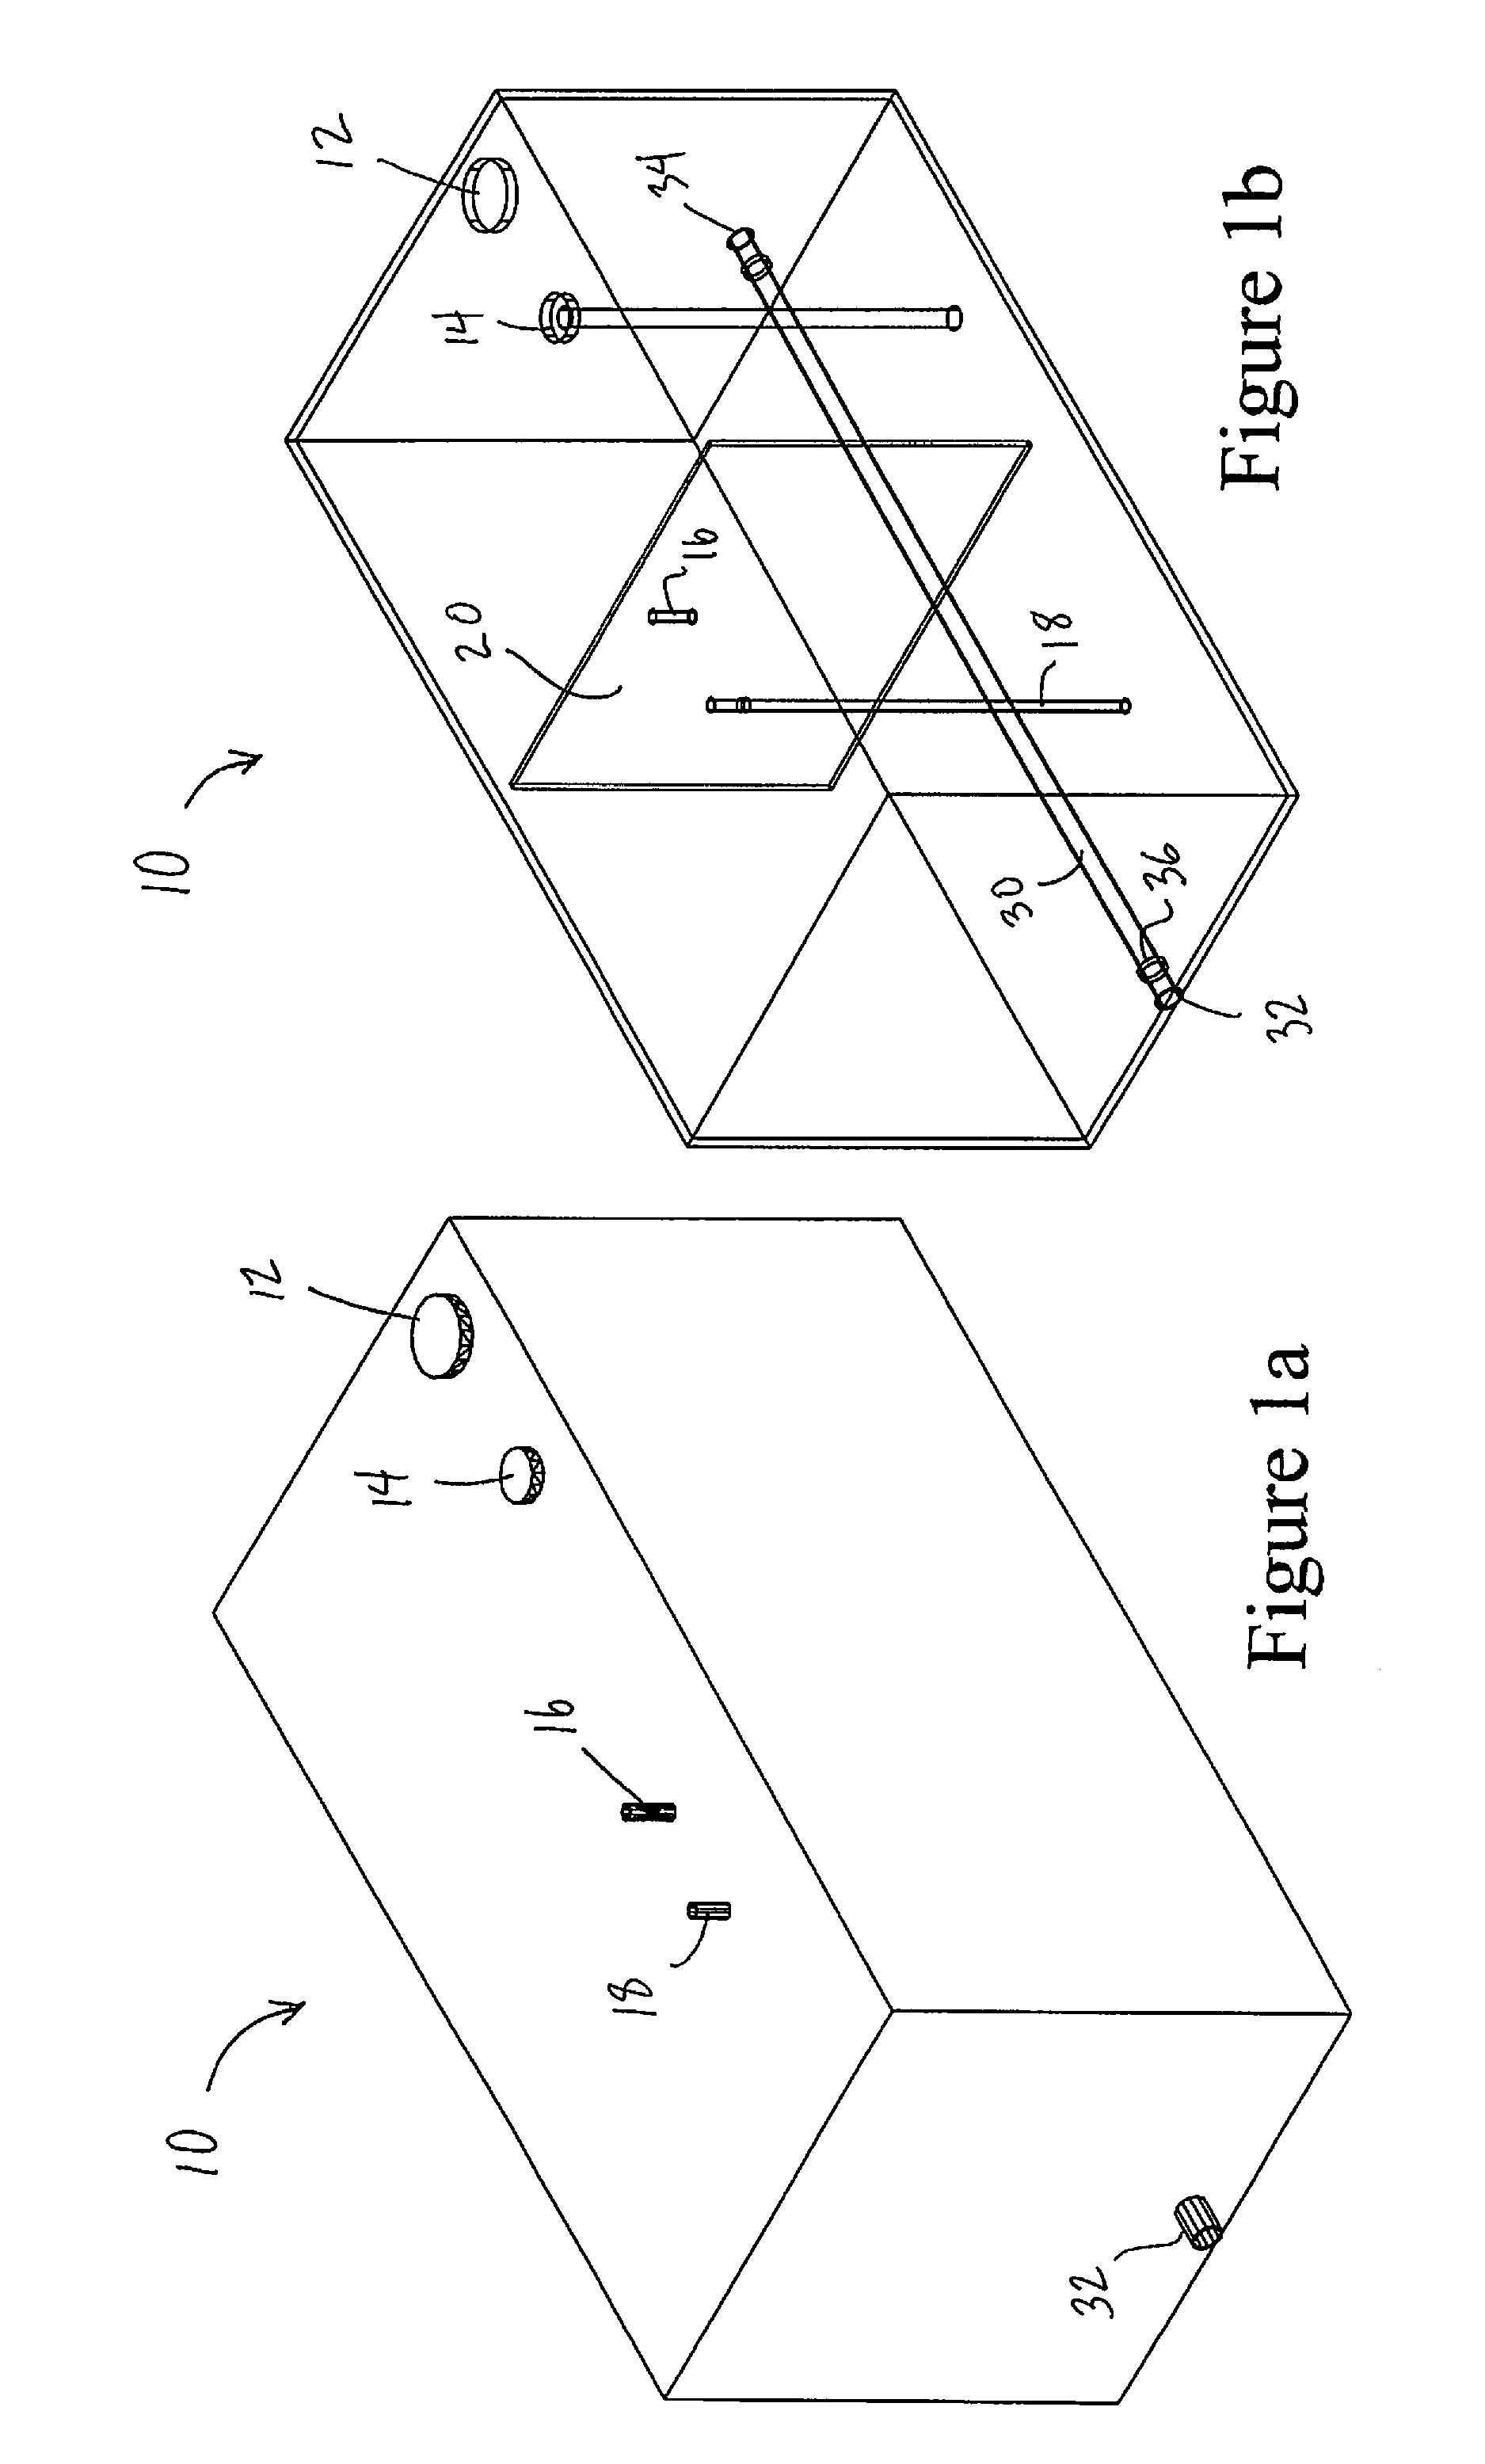 System and method for fueling diesel engines with vegetable oil